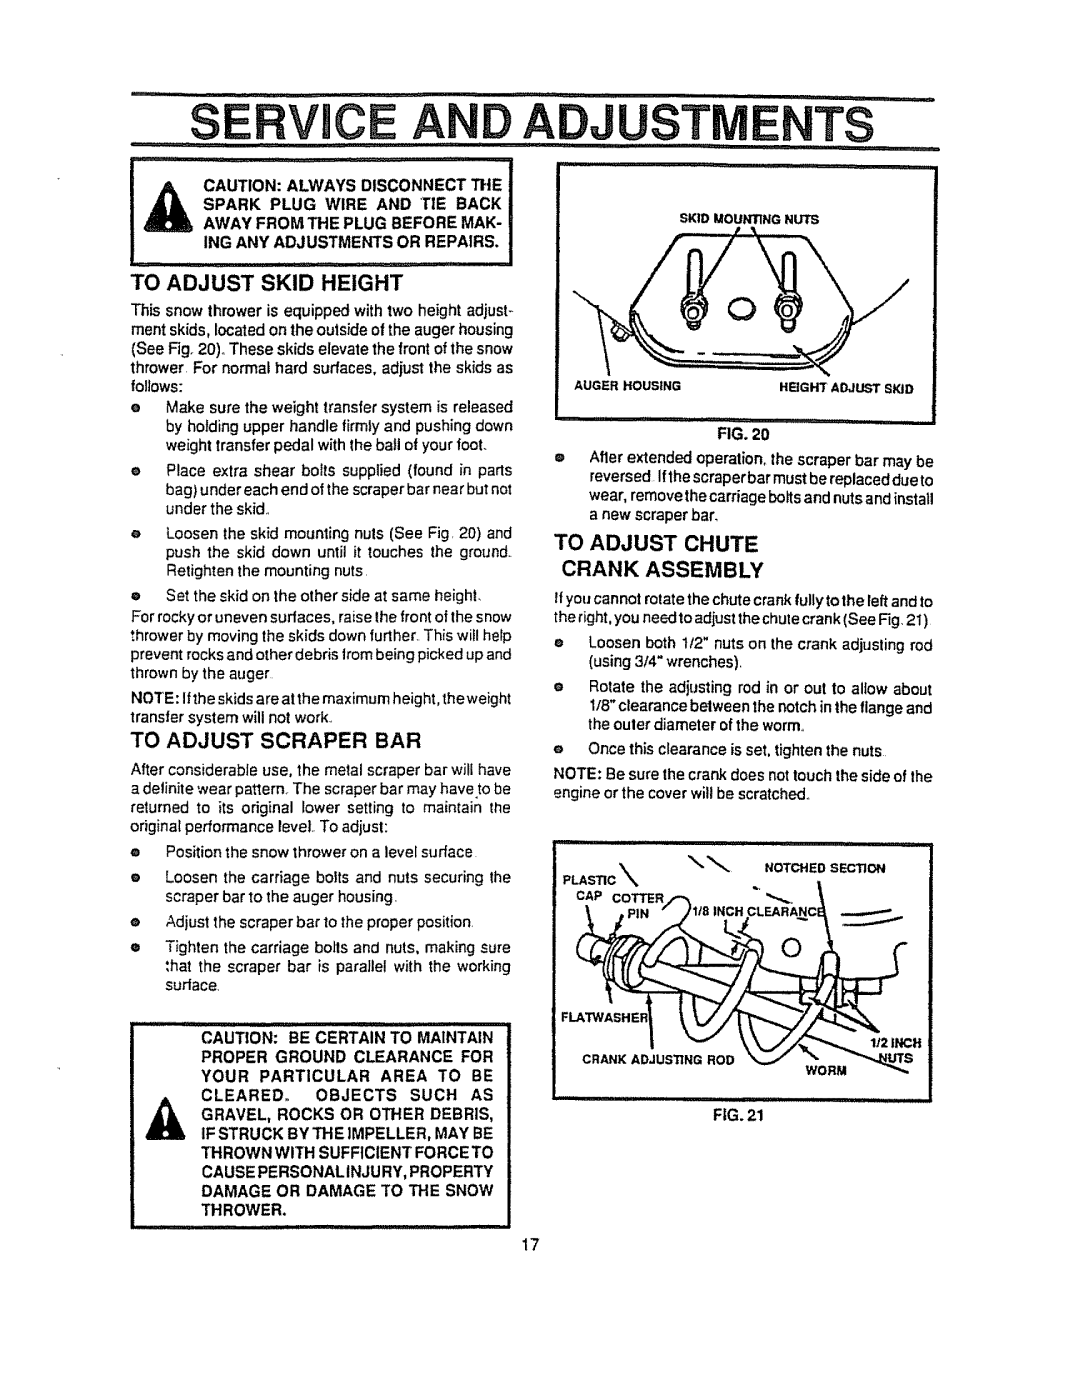 Sears 536.884821 manual Ce And, To Adjust Skid Height, To Adjust Chute Crank Assembly, To Adjust Scraper Bar 